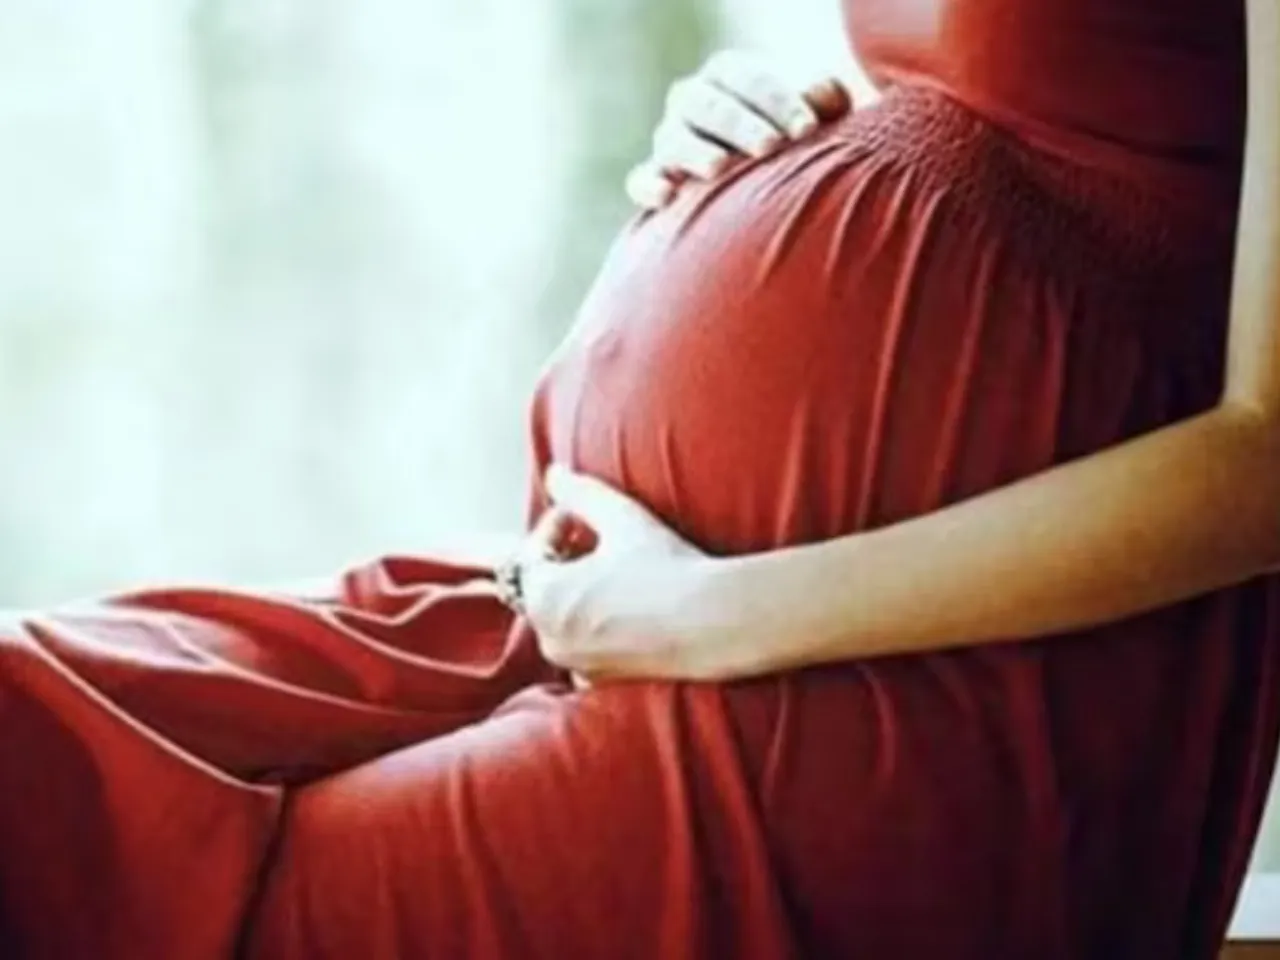 unmarried Pregnancy (IndiaToday).avif